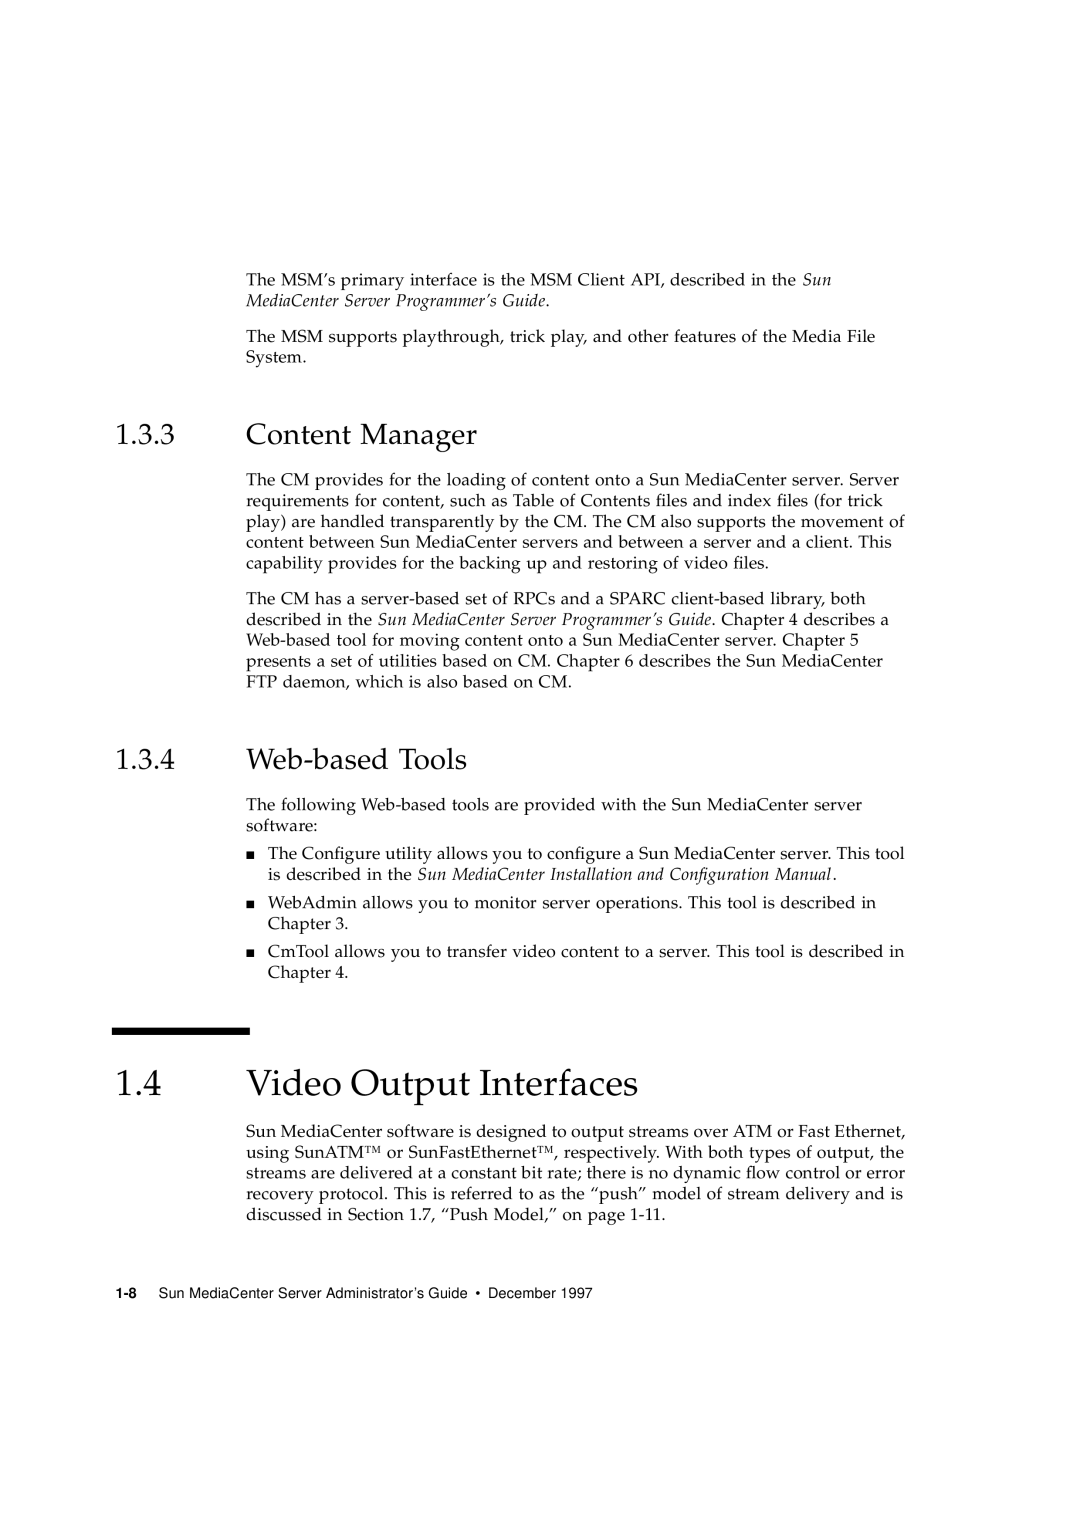 Sun Microsystems 2.1 Video Output Interfaces, Content Manager, Web-based Tools, MediaCenter Server Programmer’s Guide 